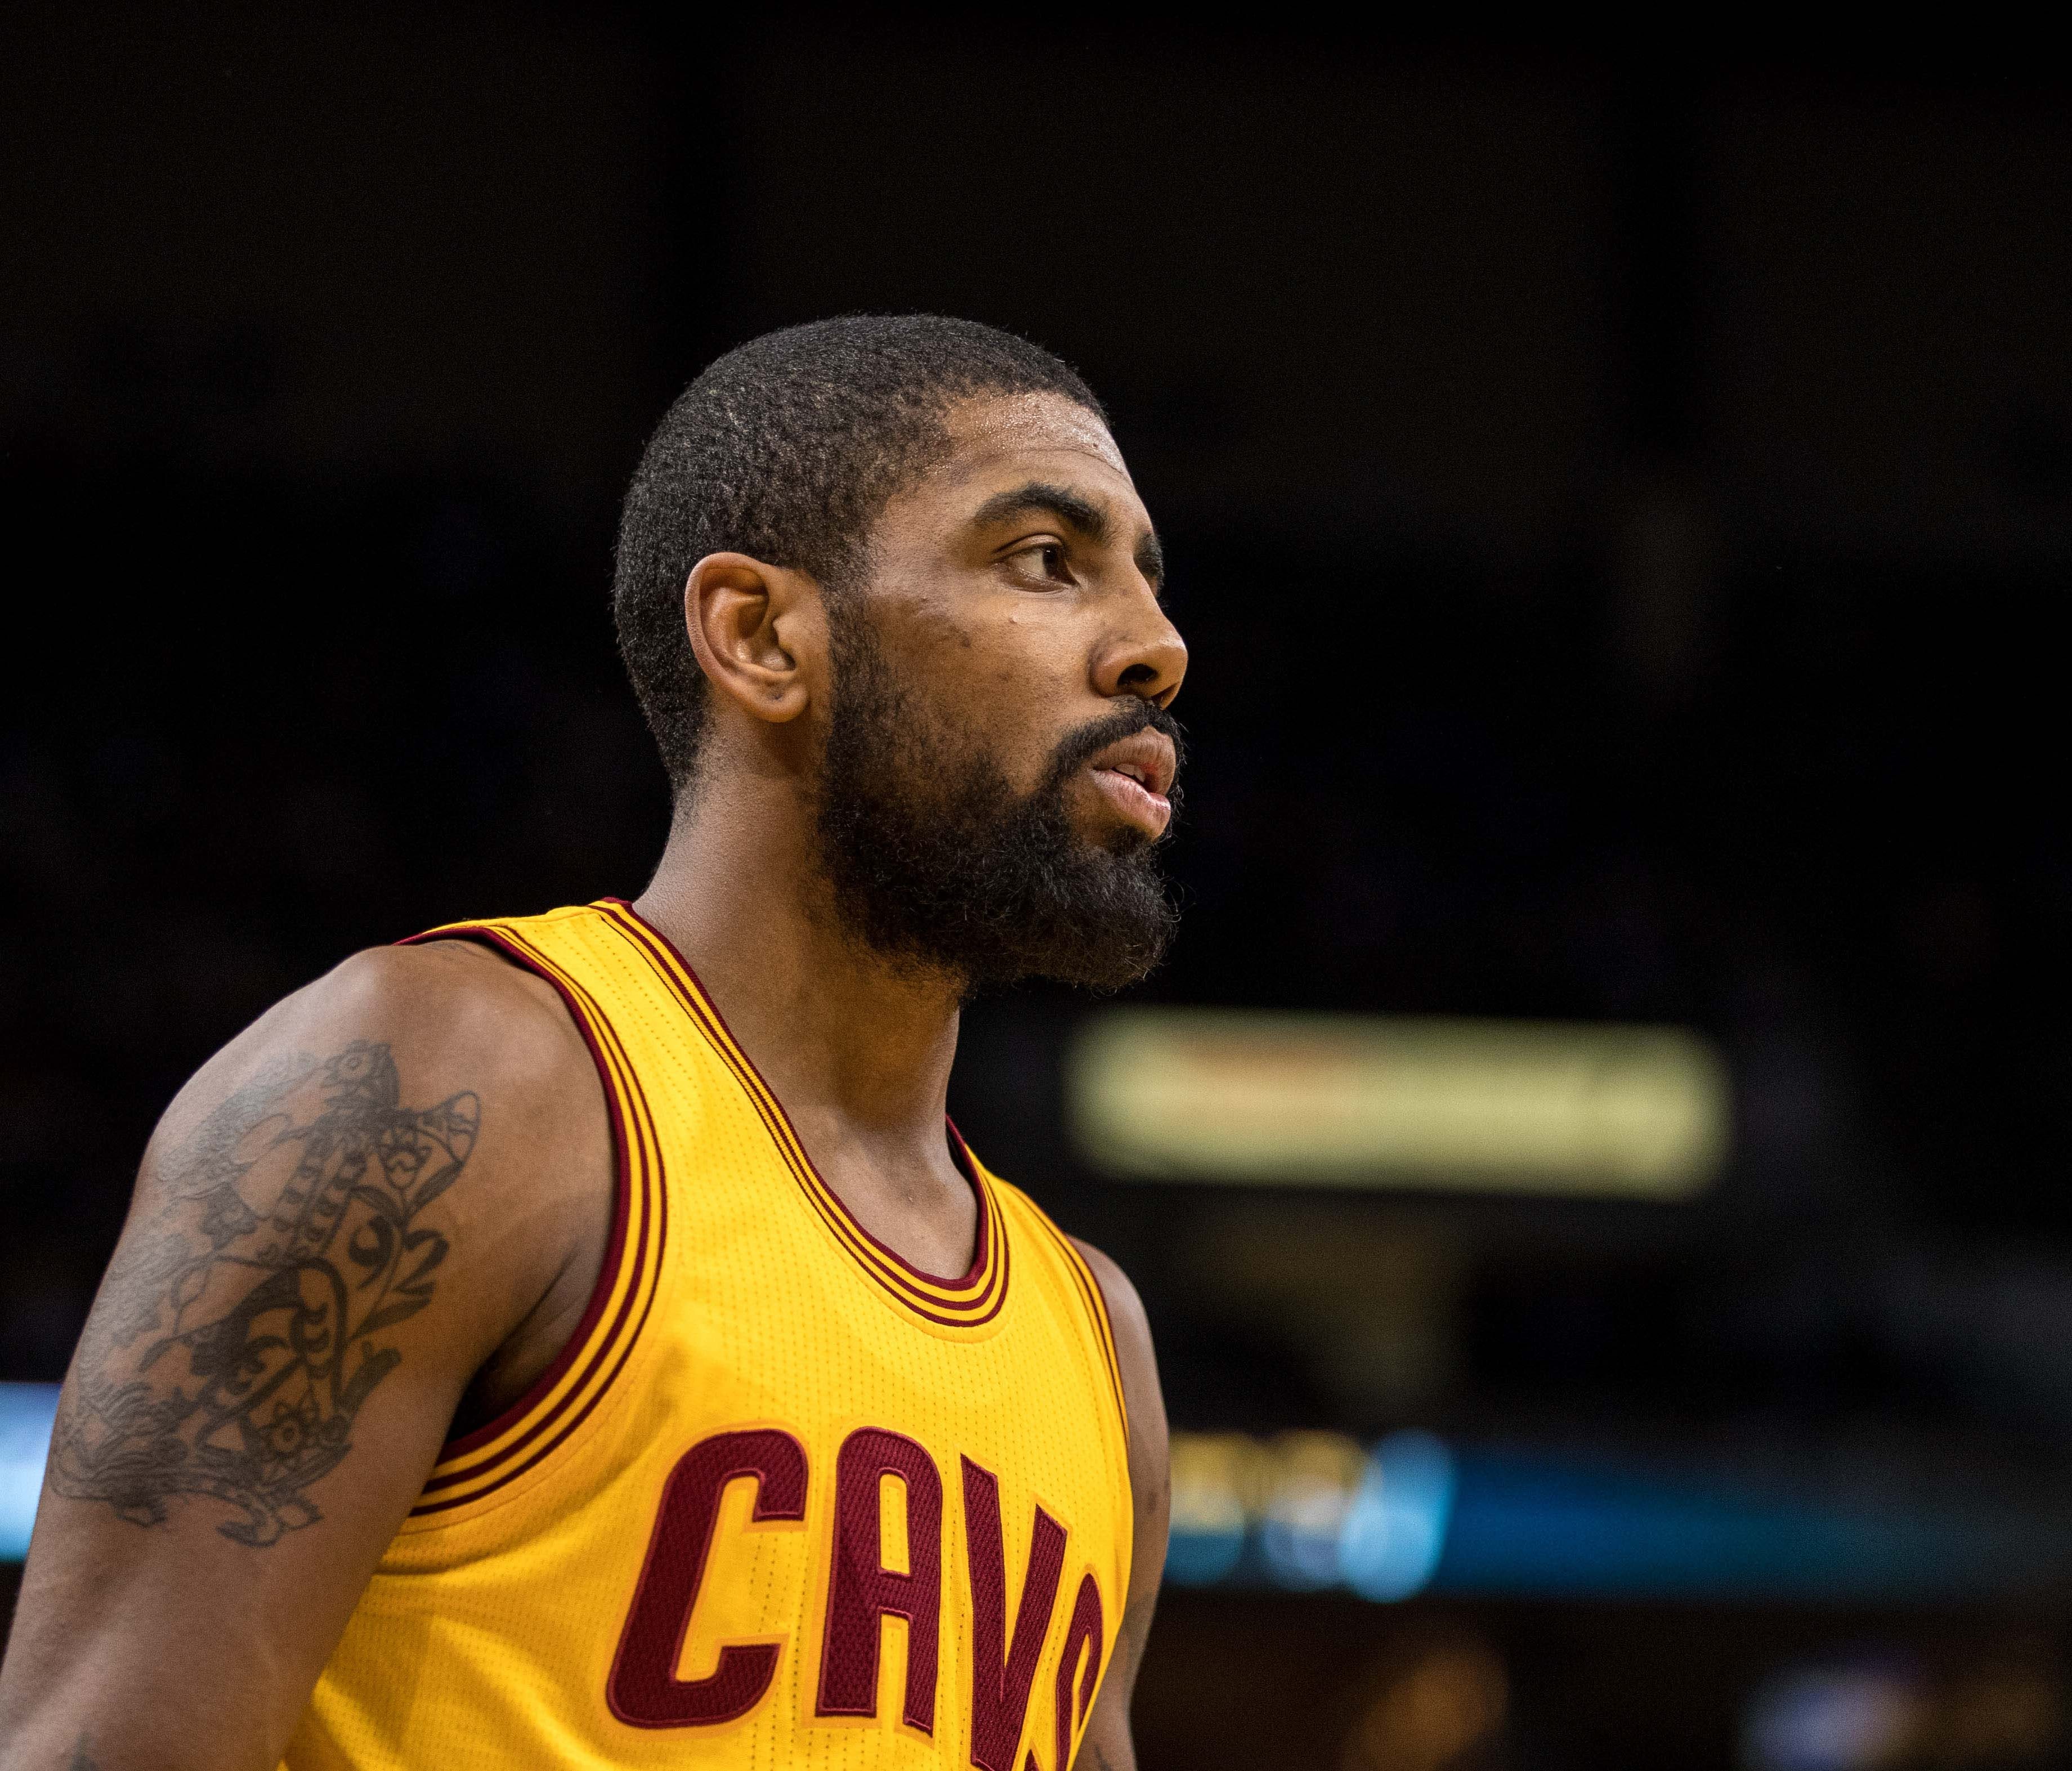 Cleveland Cavaliers guard Kyrie Irving during a game against the Minnesota Timberwolves.